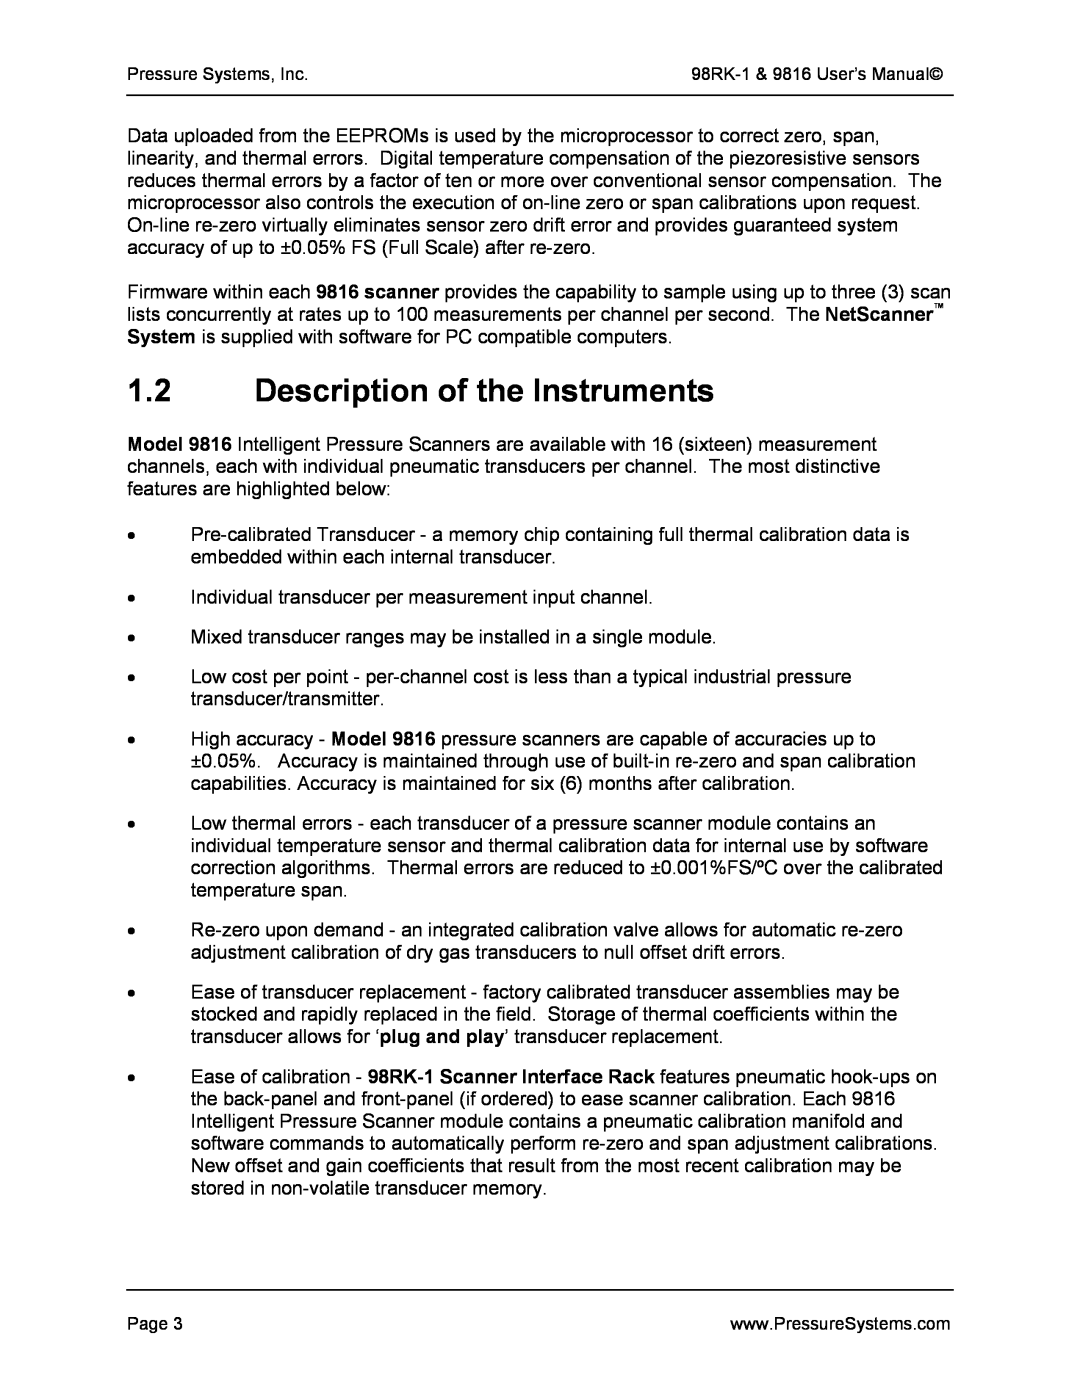 Pressure Systems 98RK-1 user manual Description of the Instruments 